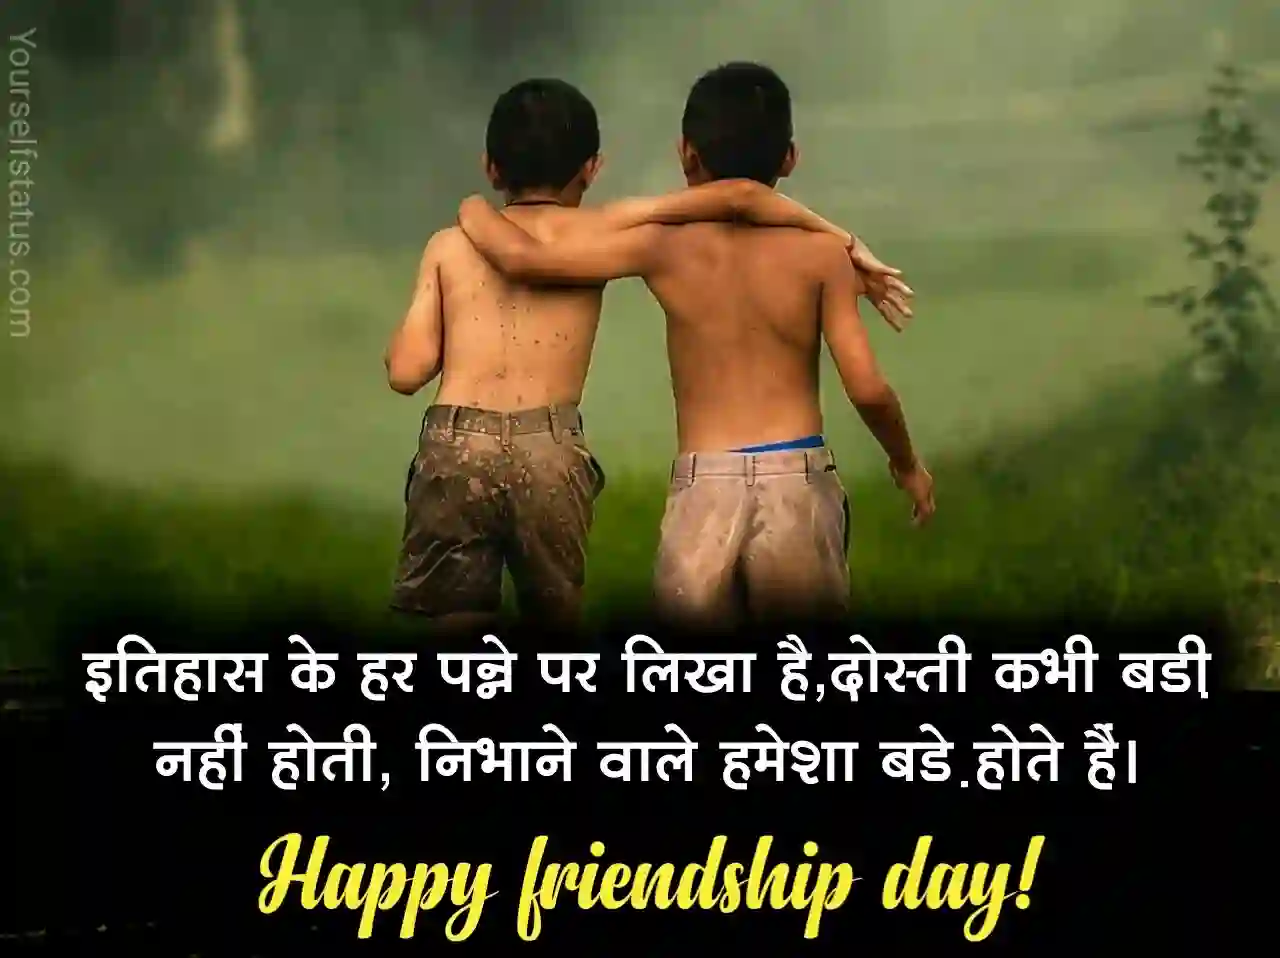 Friendship day wishes in hindi